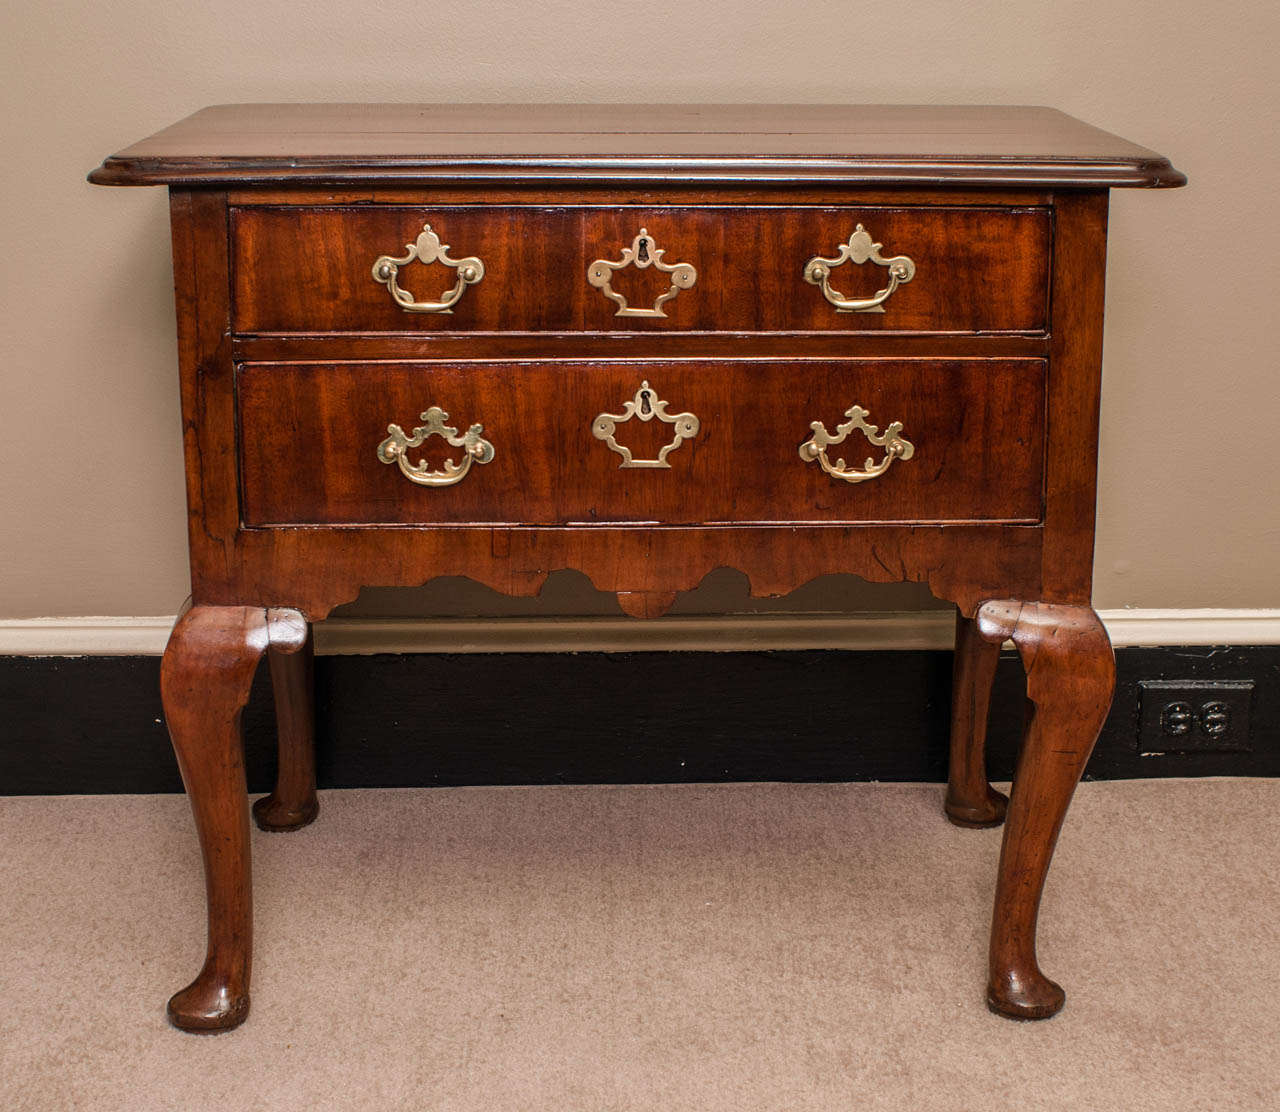 Excellent proportions - rich mellow patina to the beautifully grained mahogany - graceful cabriole legs with pad feet - two drawers - moulded oversized tray top -- hardware appears to be original.